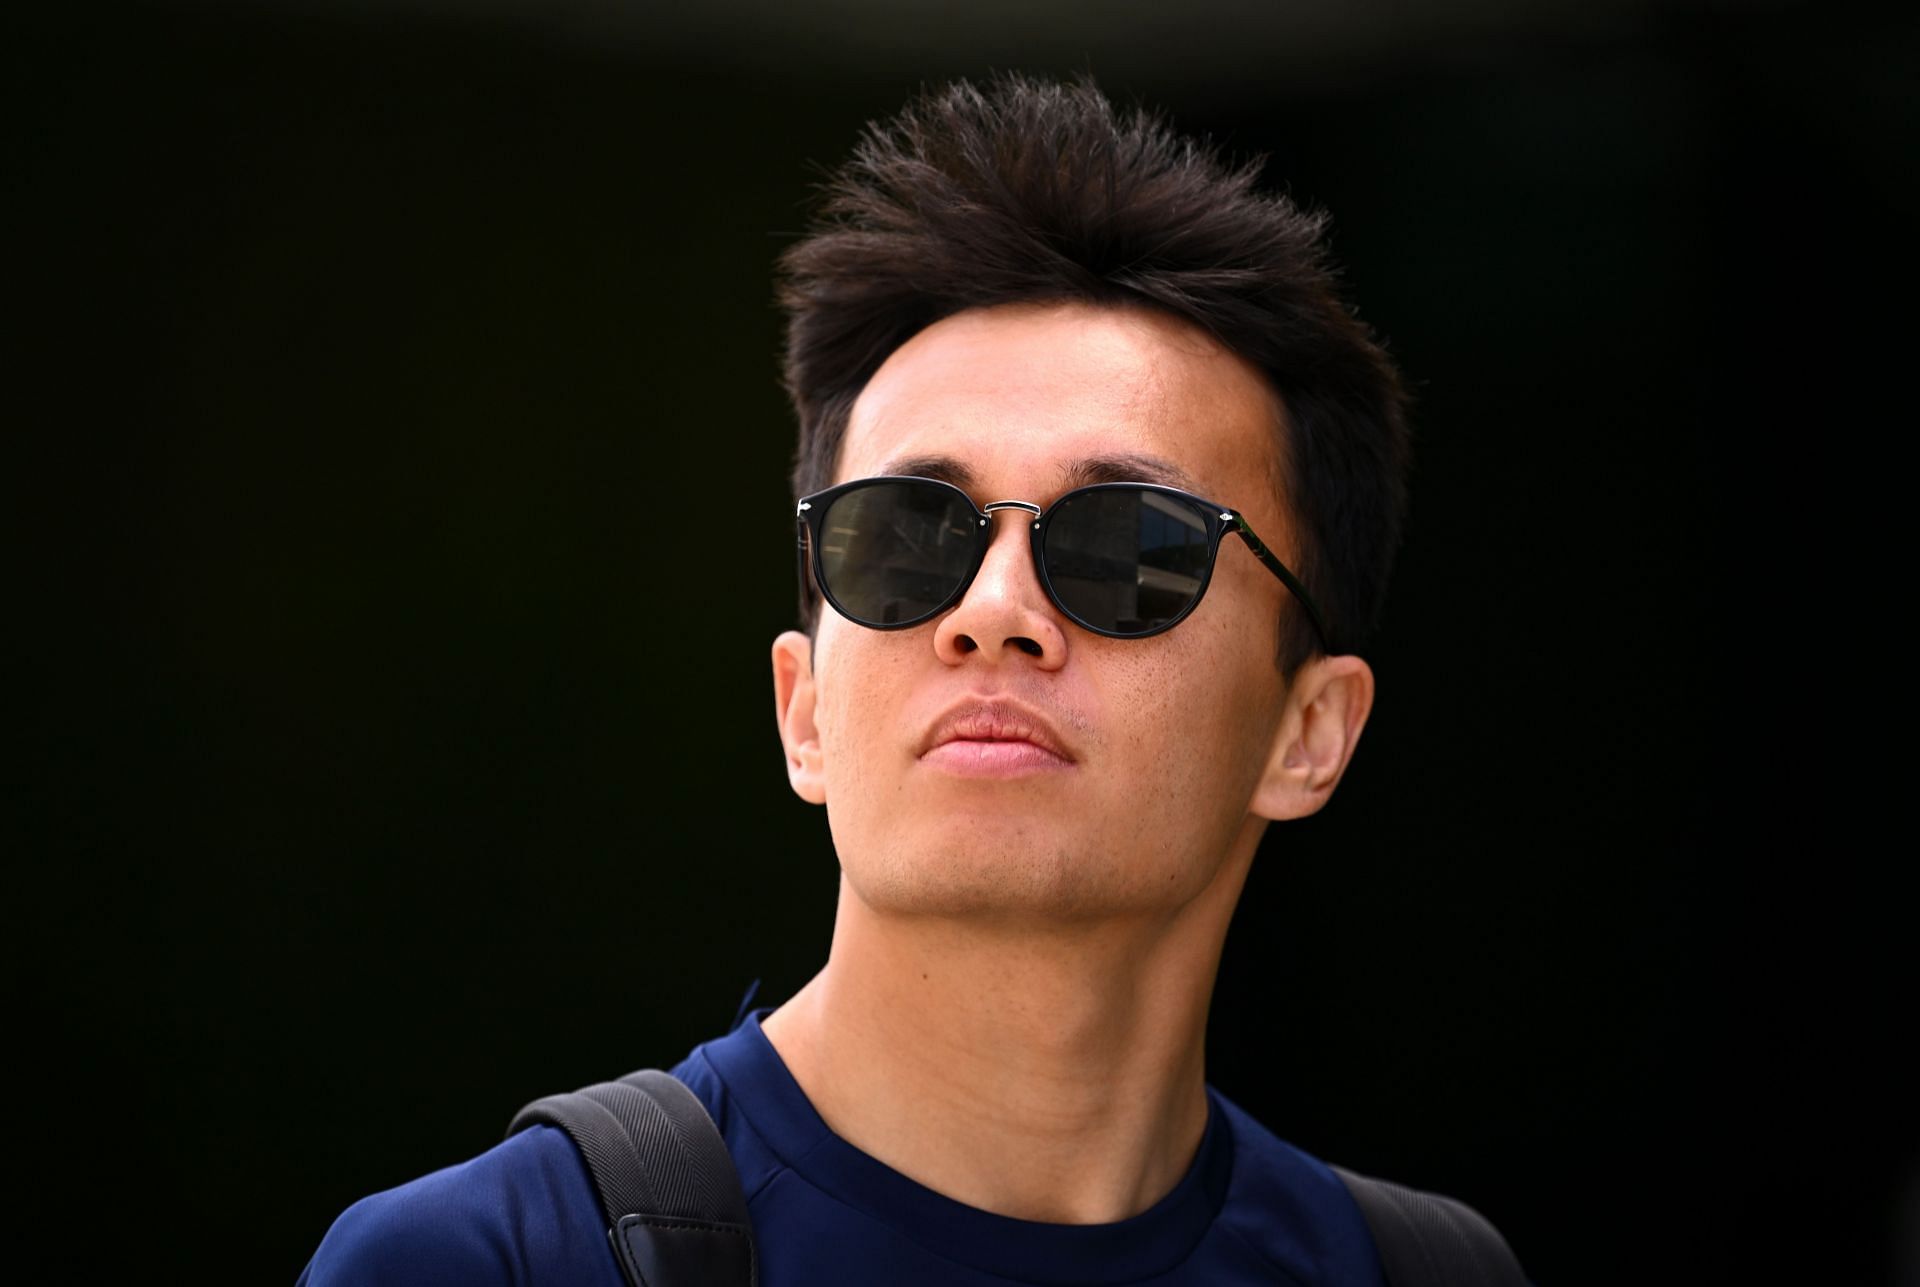 Alex Albon feels there needs to be more time given to the lapped cars to join the leading group